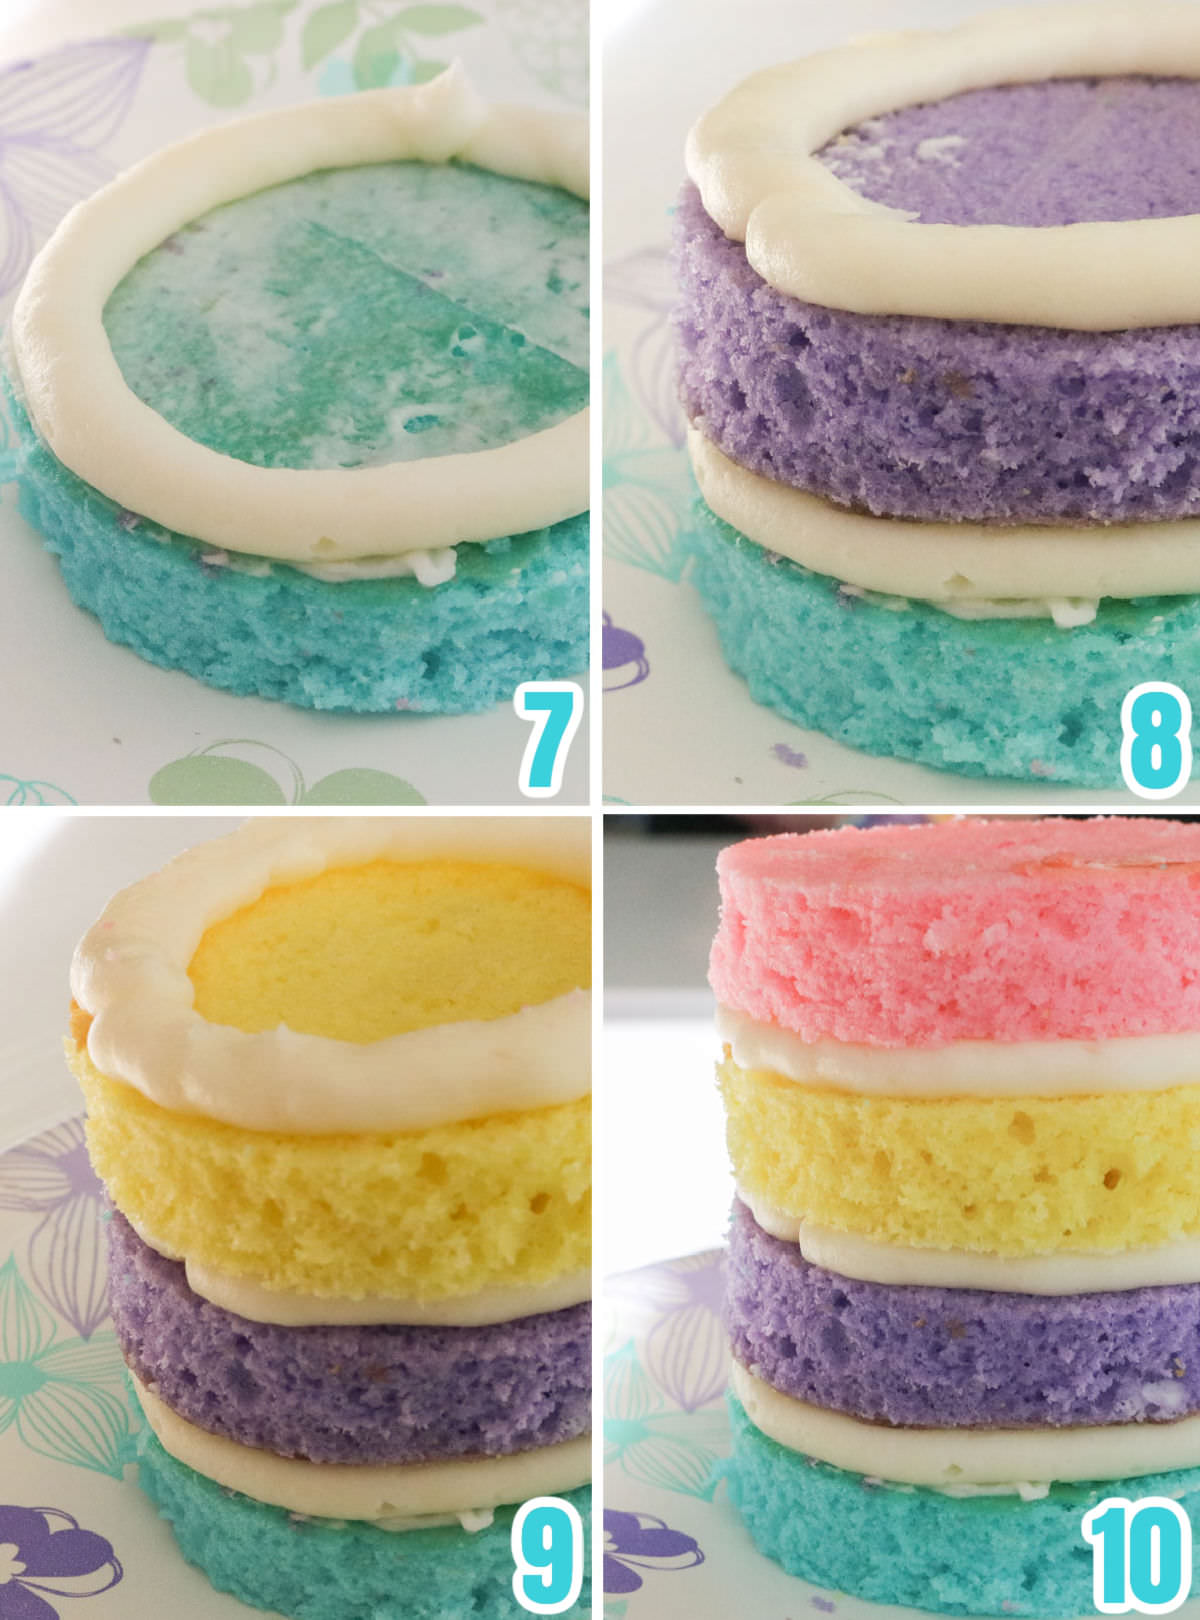 Collage image showing the steps you will take to build the Easter Bunny Mini Cakes.